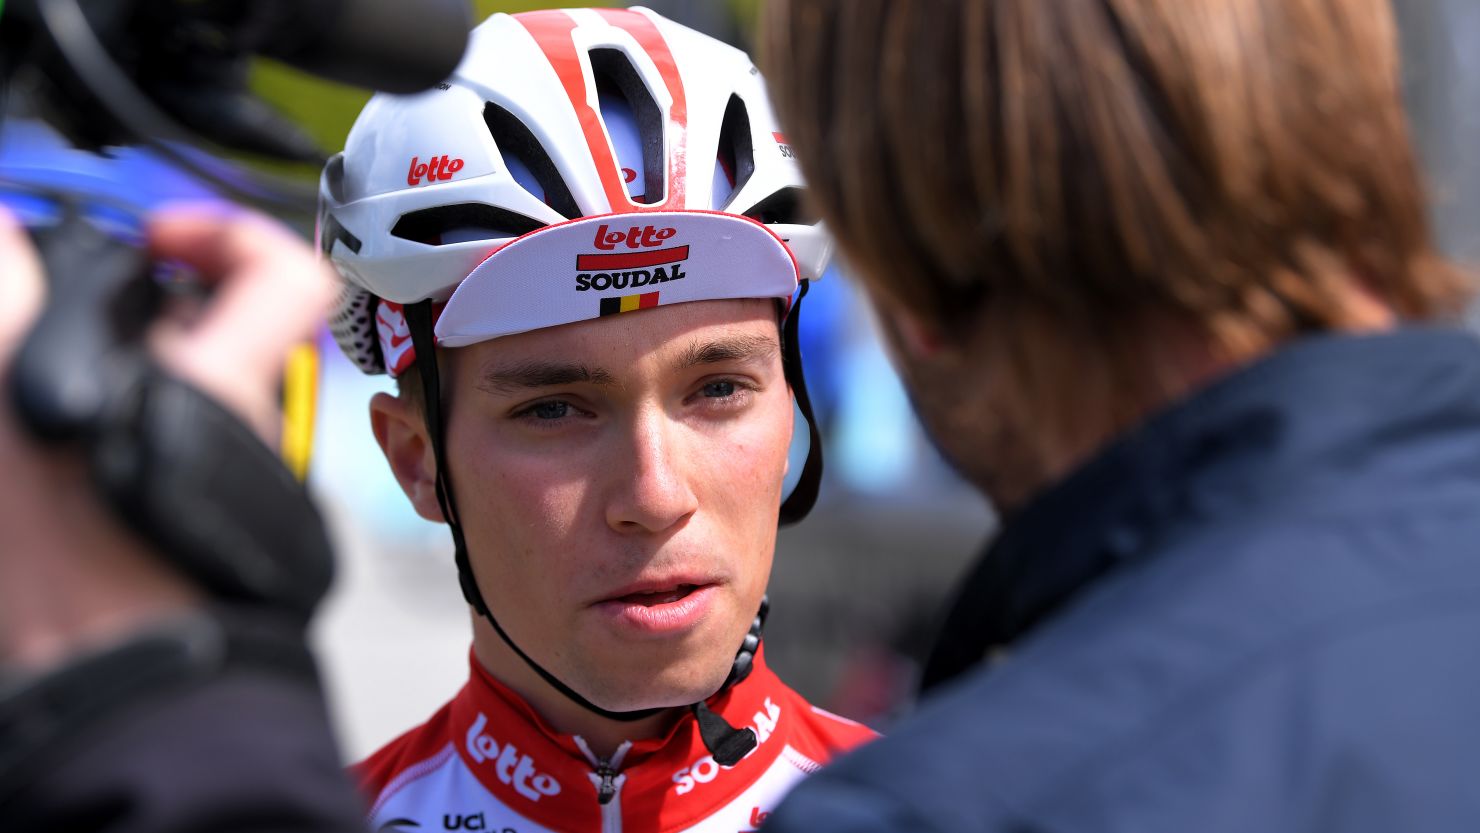 Bjorg Lambrecht of Belgium was an up and coming star in the cycling world.